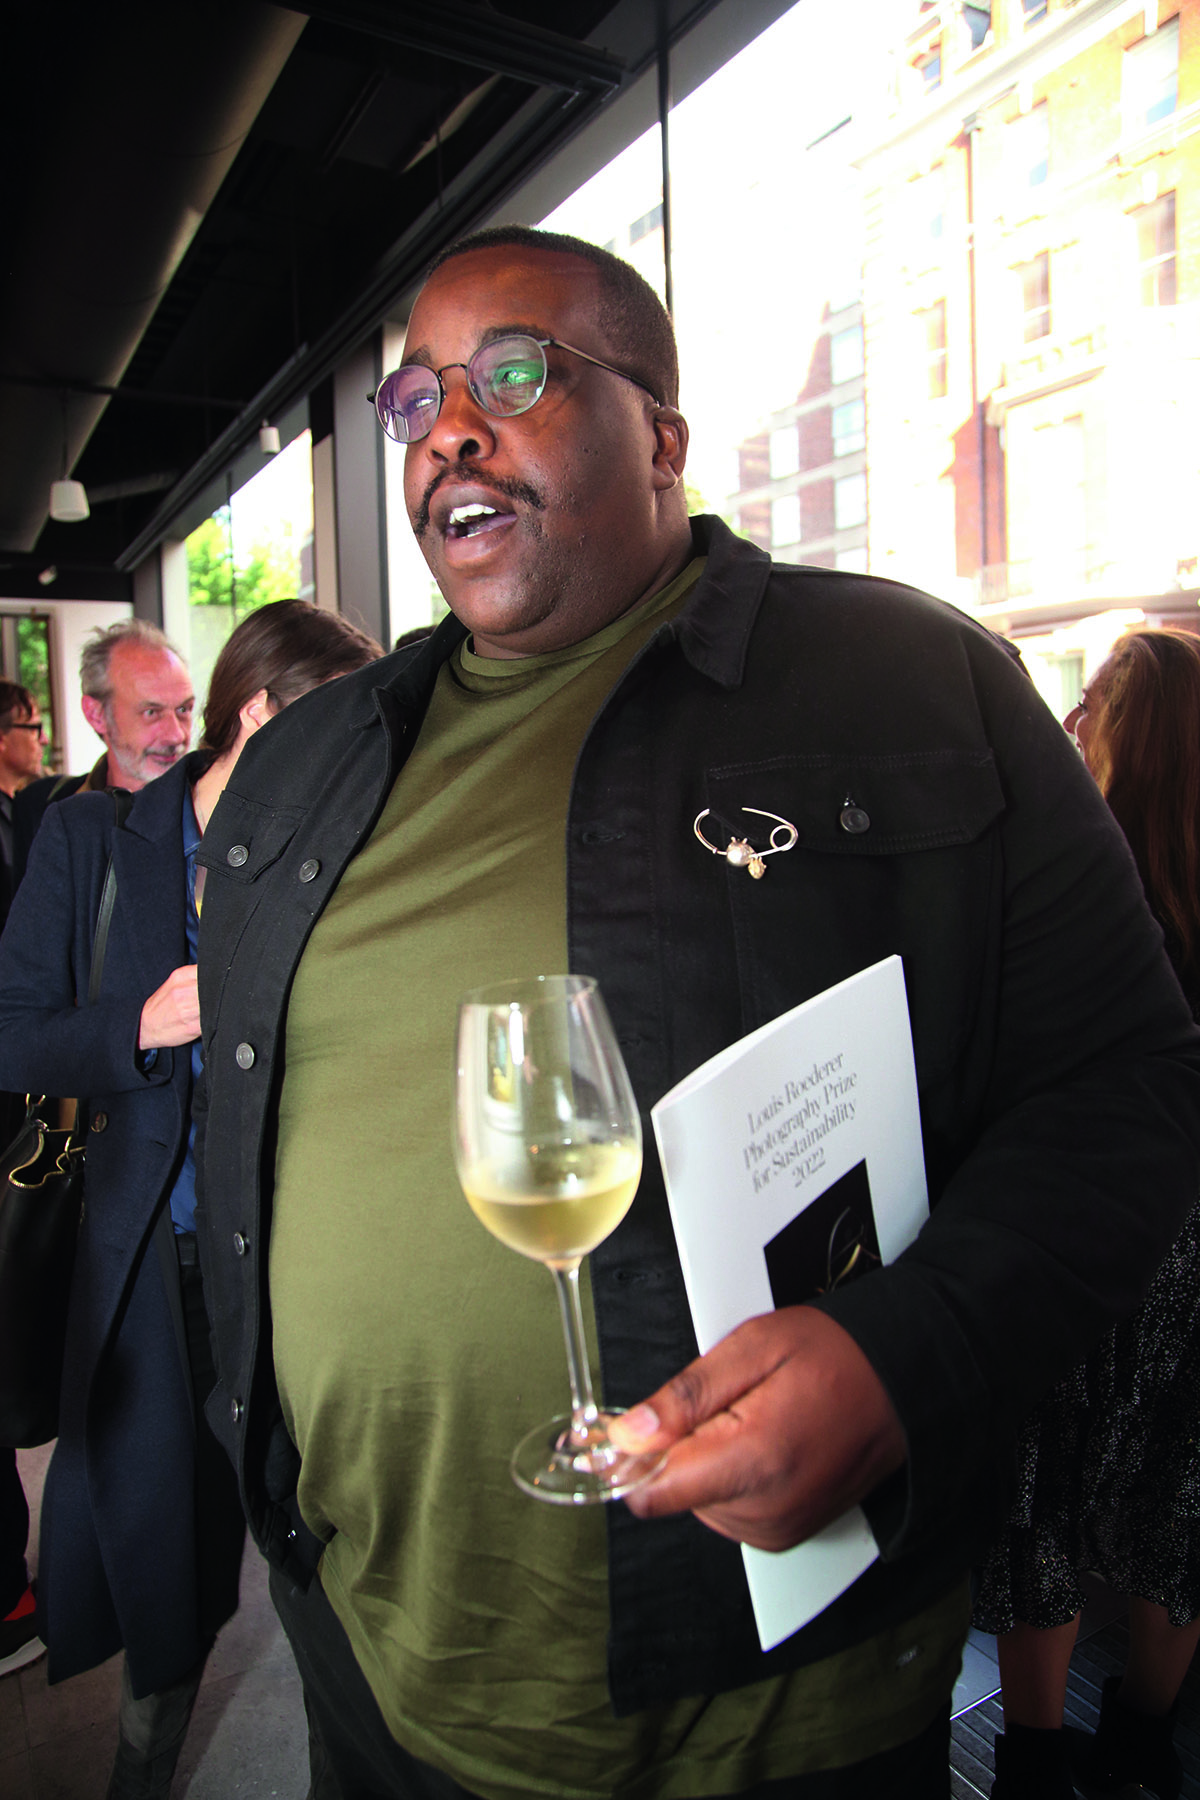 A man holding a champagne glass wearing a green t shirt and black jacket